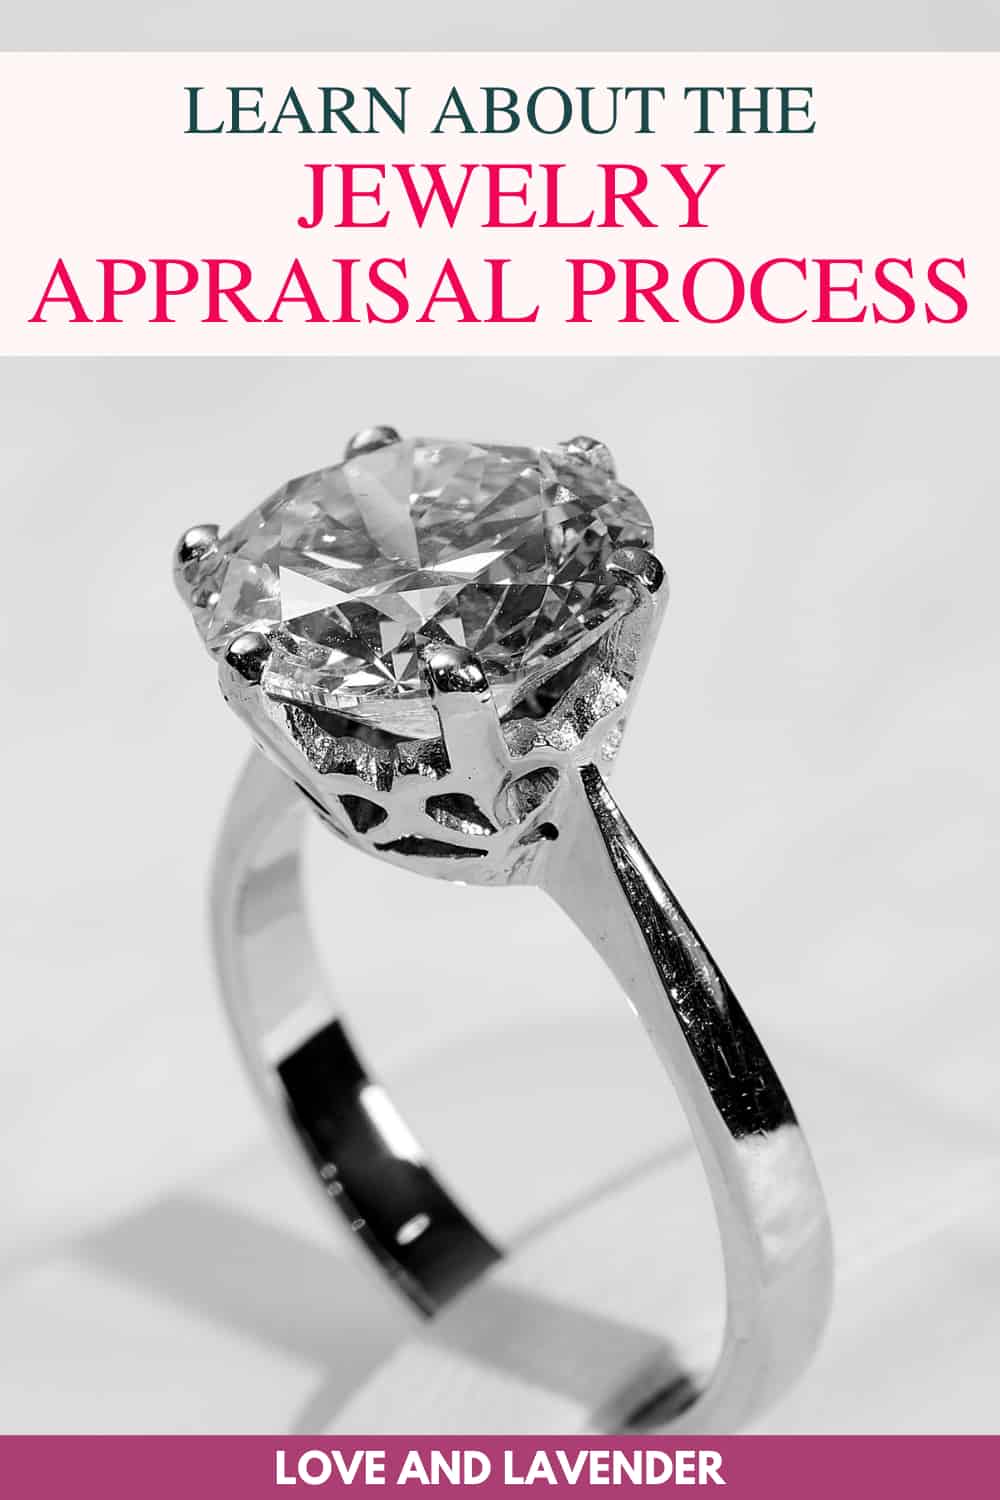 A Quick Guide to the Jewelry Appraisal Process